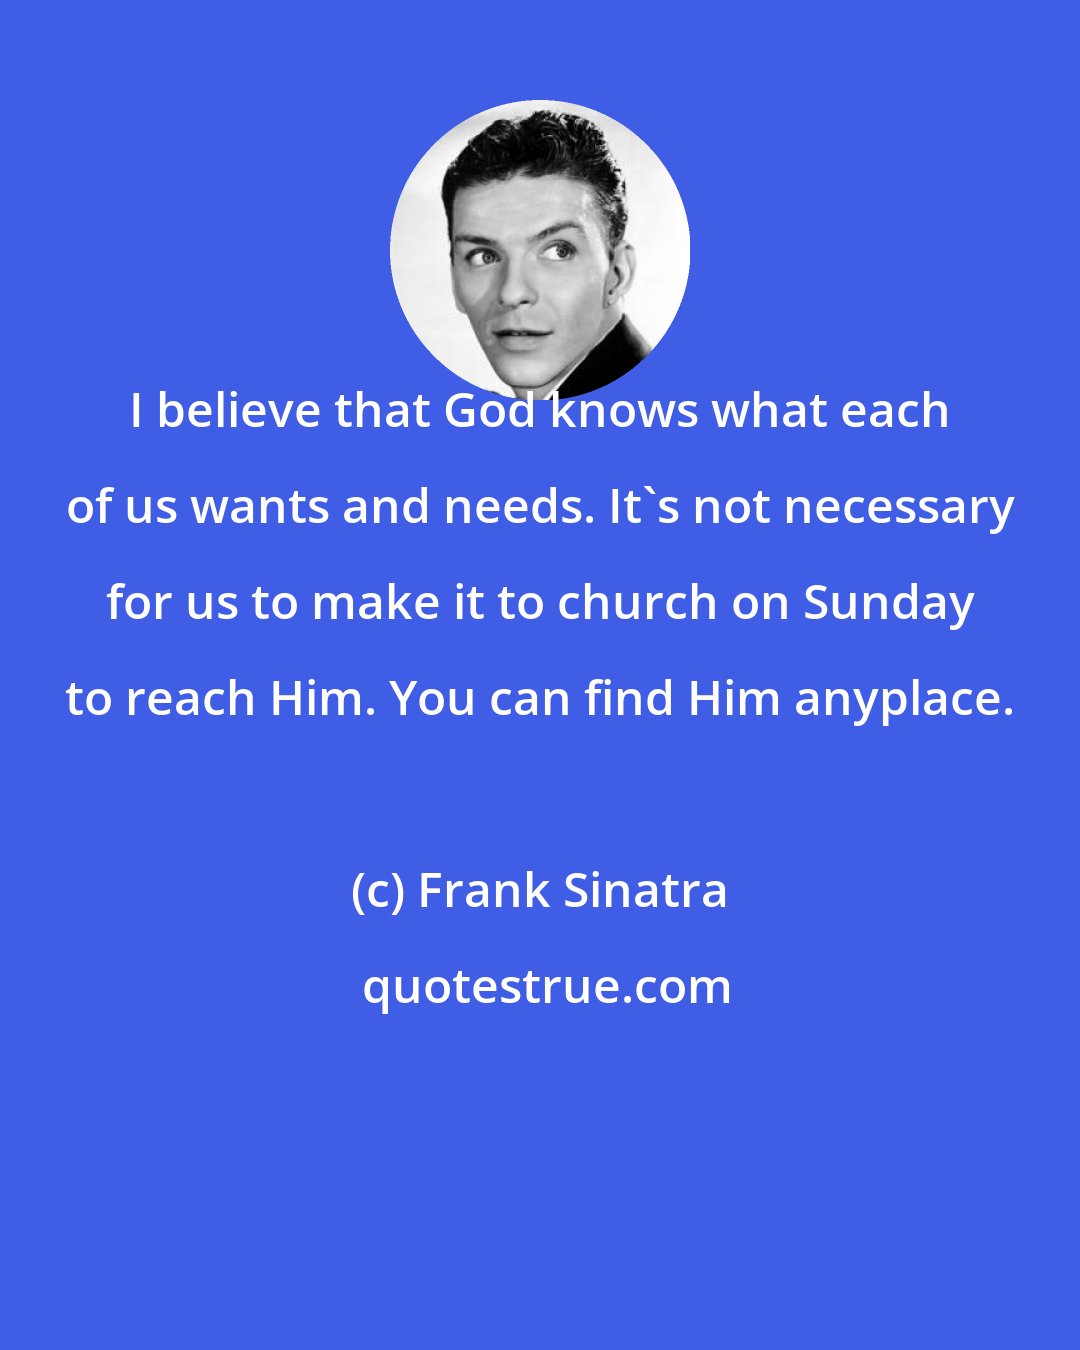 Frank Sinatra: I believe that God knows what each of us wants and needs. It's not necessary for us to make it to church on Sunday to reach Him. You can find Him anyplace.